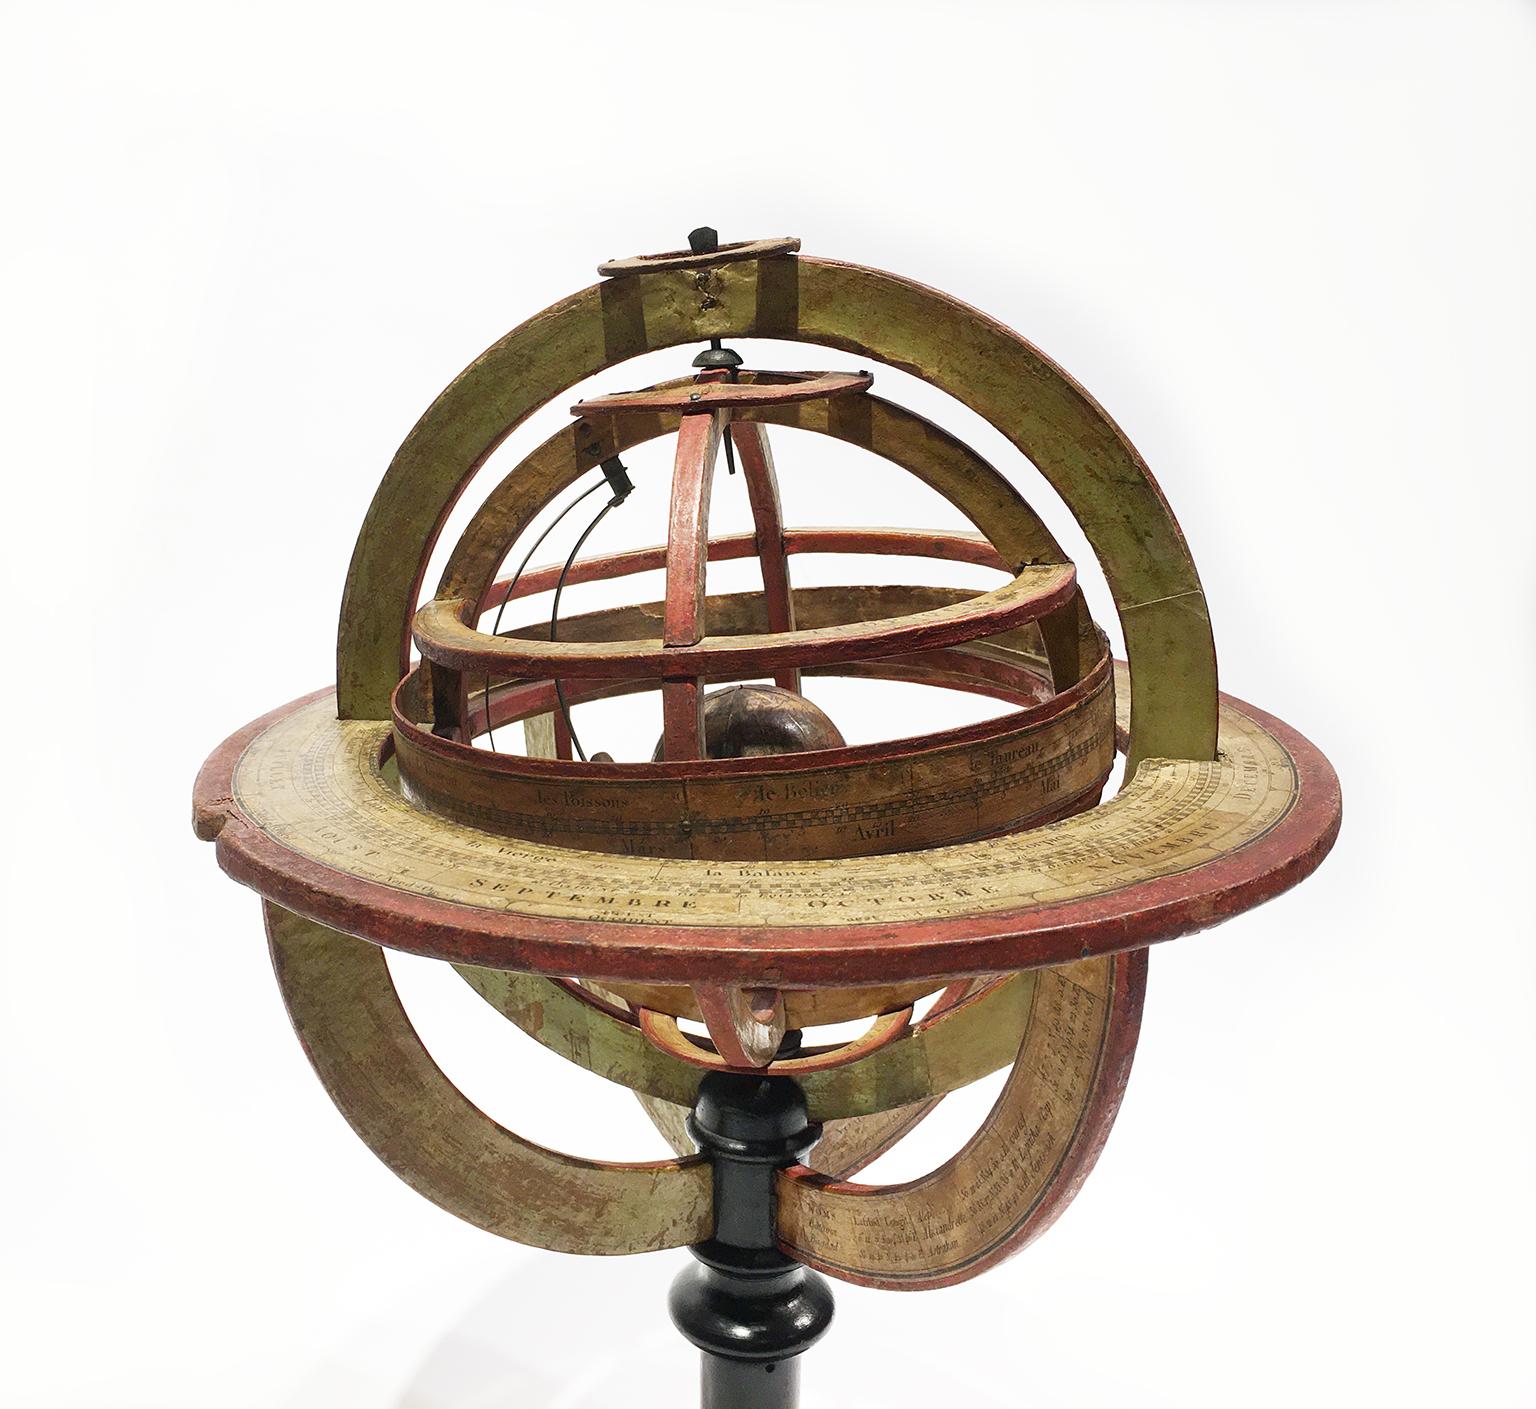 Charles-François Delamarche
Ptolemaic armillary sphere
Paris, circa 1805-1810
Wood and papier-mâché
covered with printed and partly hand-coloured paper
It measures 15.74” in height, 11.02” in diameter (40 – Ø 28 cm)
2.052 lb (931 g)

State of